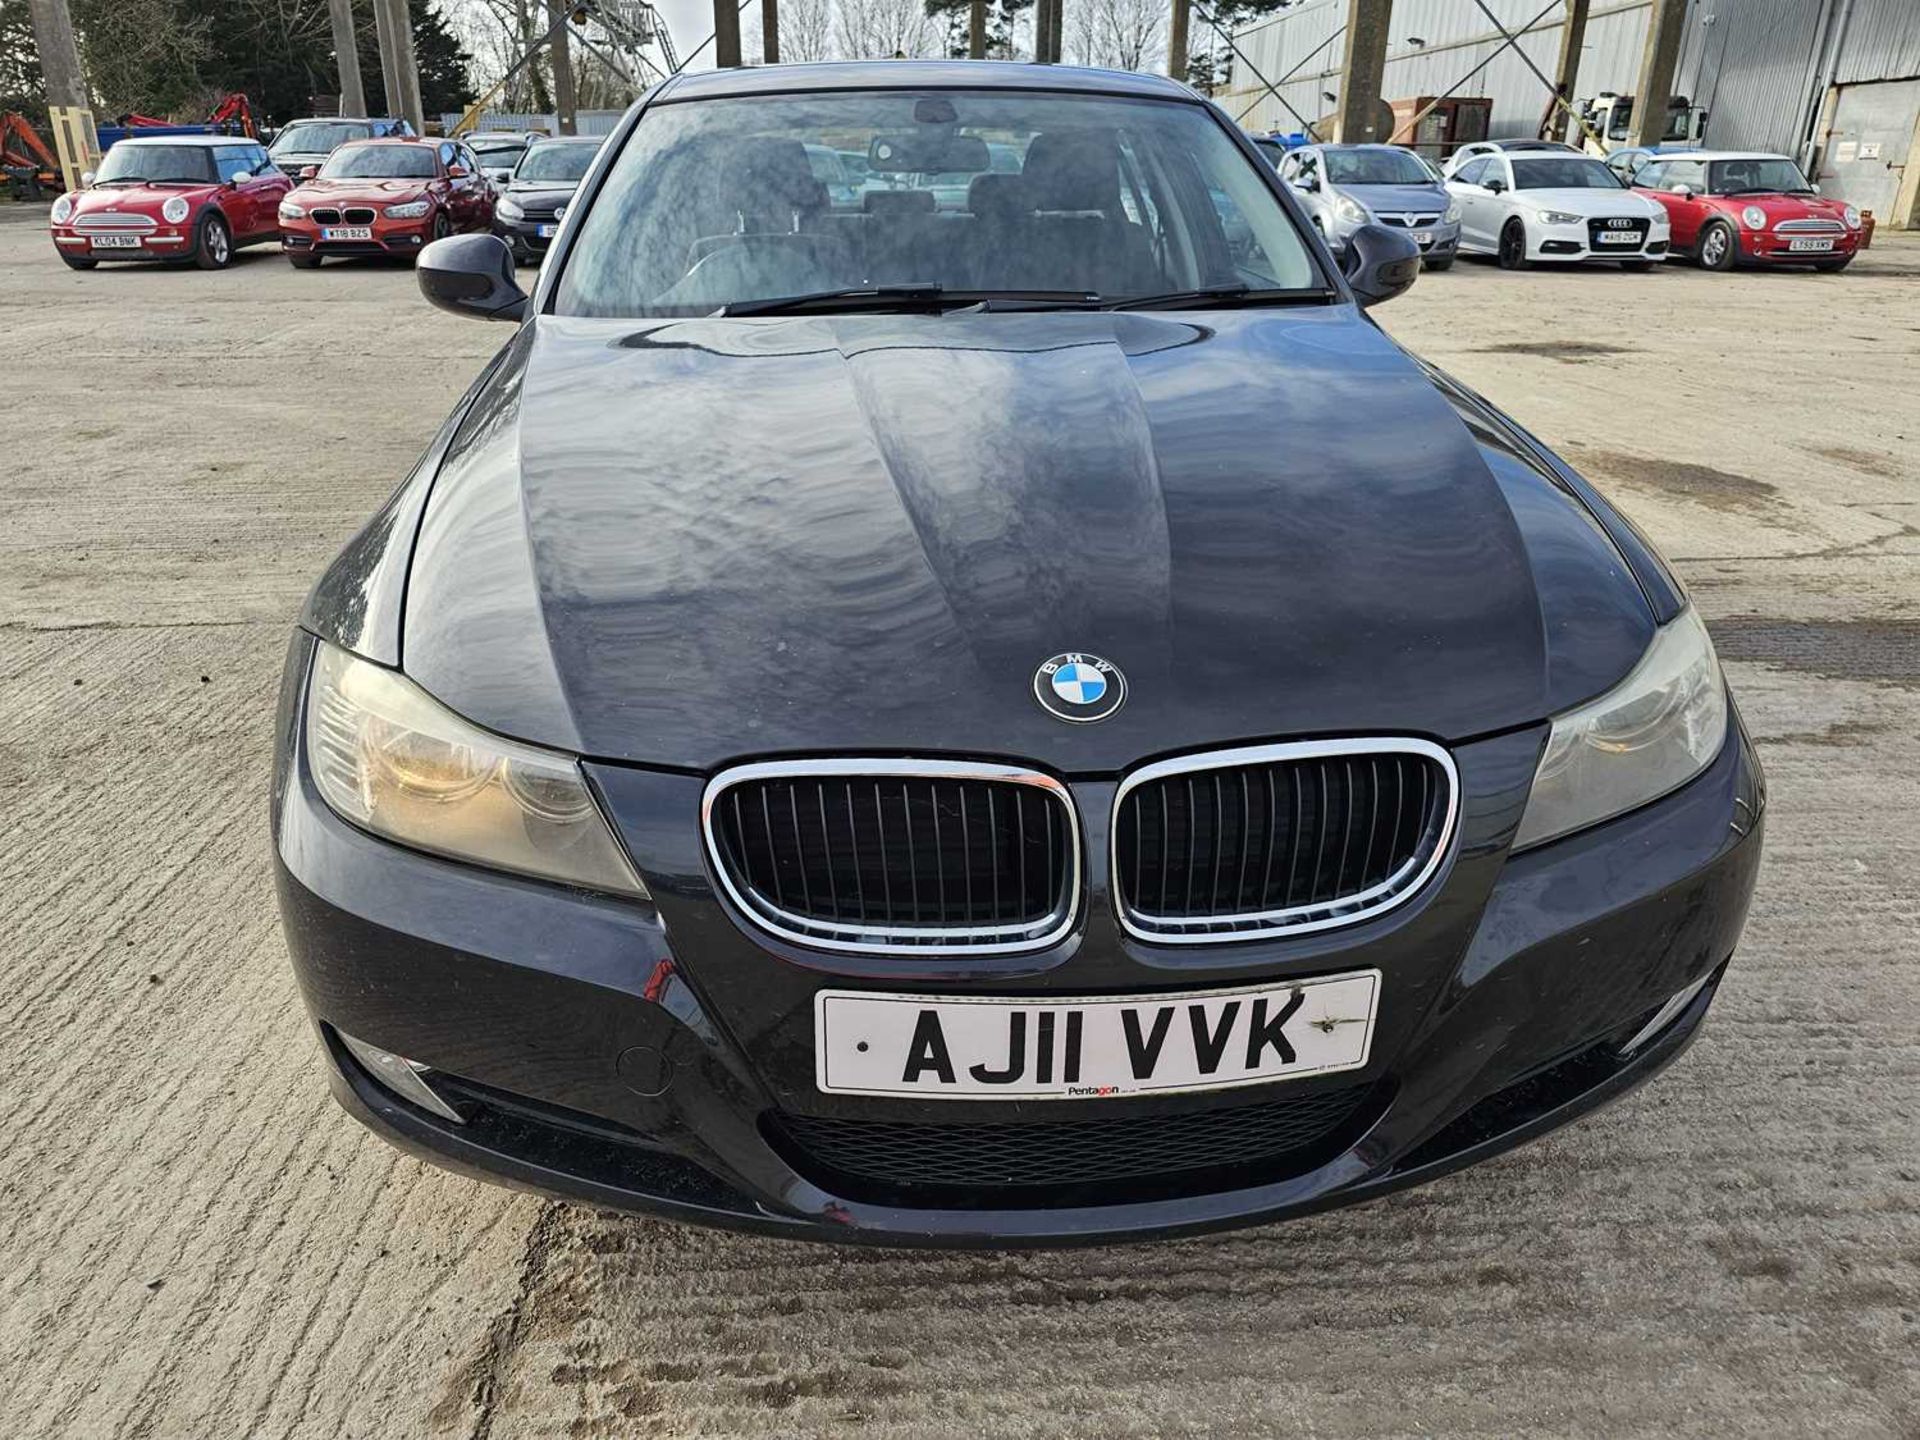 2011 BMW 320D, 6 Speed, Parking Sensors, Bluetooth, A/C (Reg. Docs. Available, Tested 01/25) - Image 3 of 28